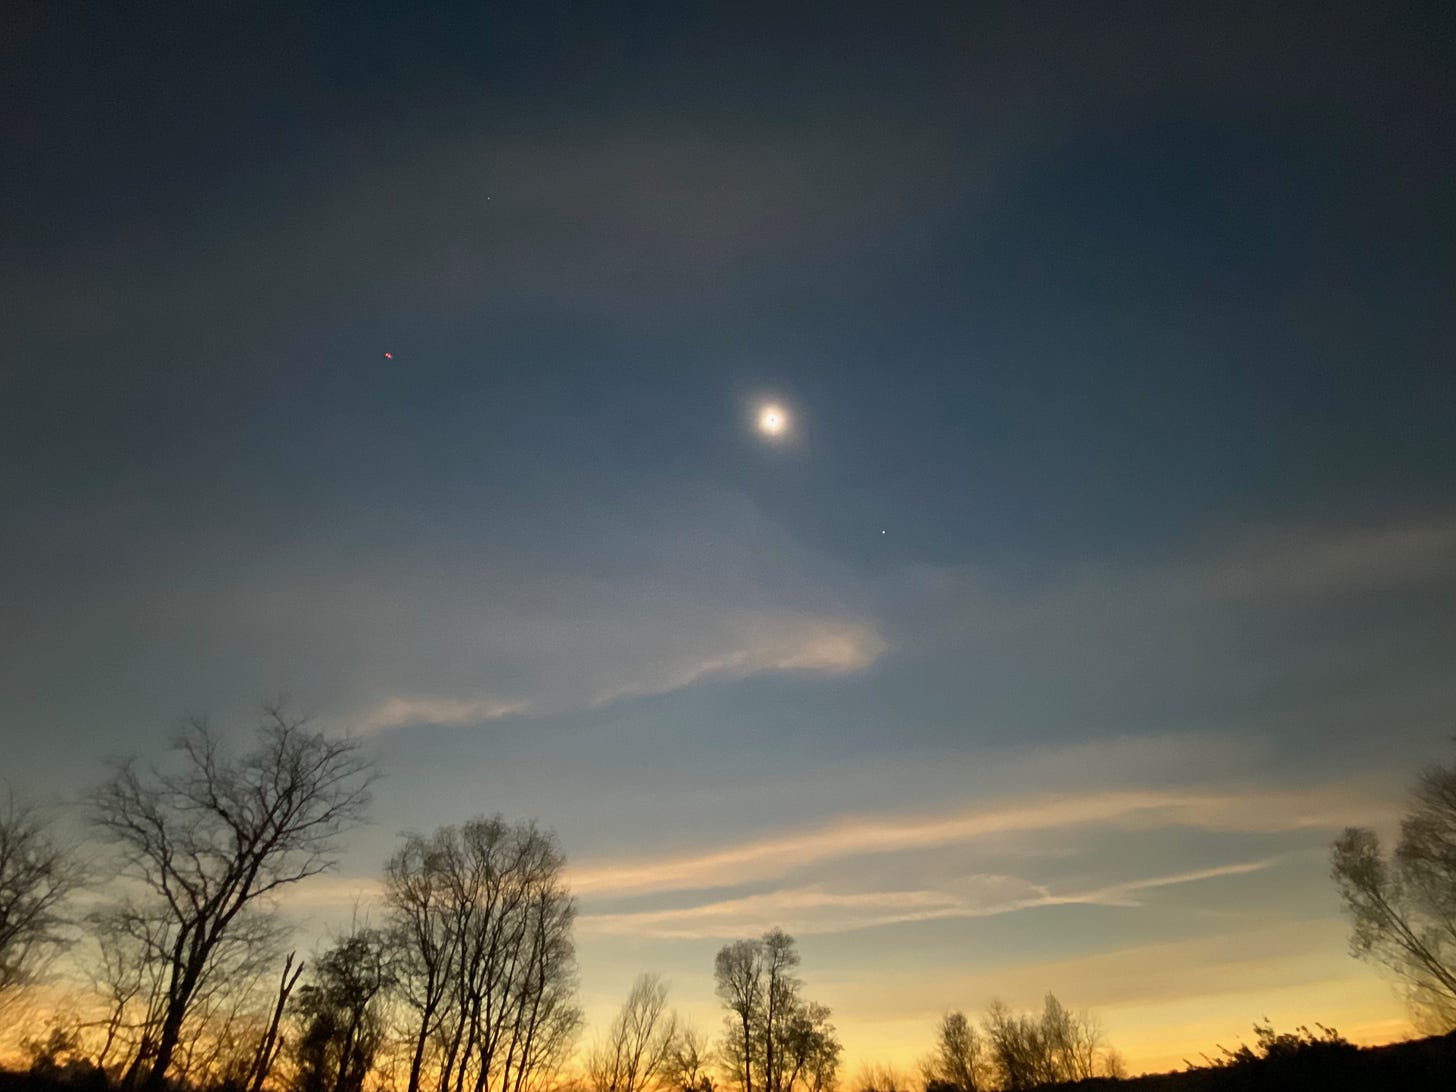 The total solar eclipse leaves a twilight in all directions, with planets (and a drone) visible in the darkened sky.